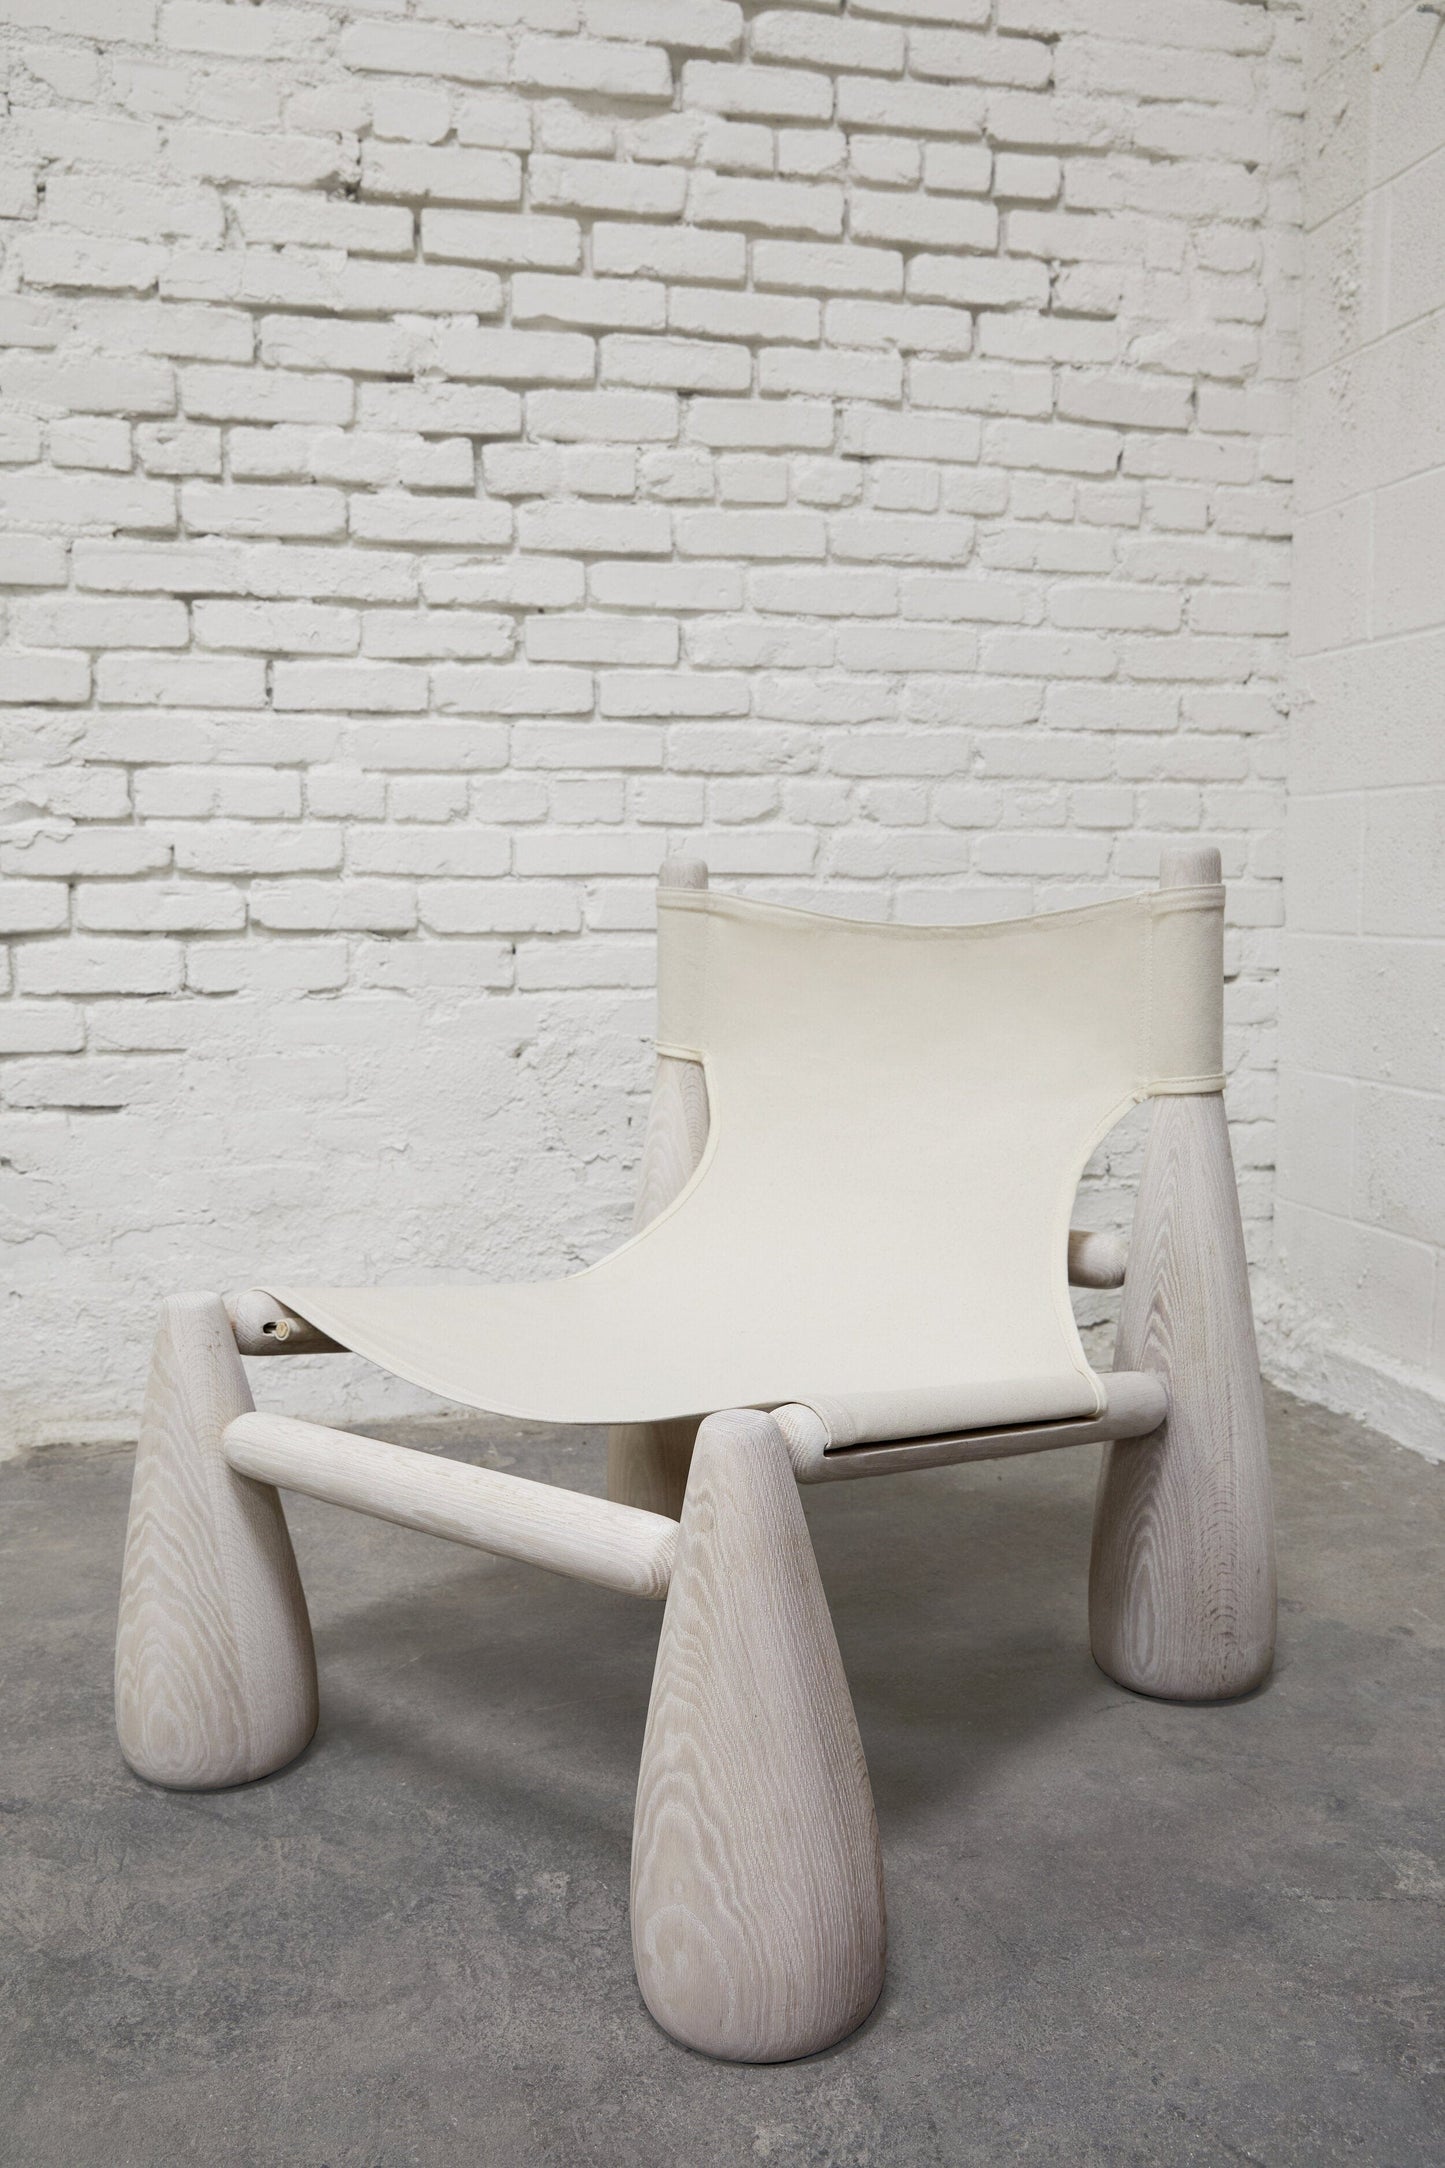 Bell Chair by Studio Sam Klemick Chairs Without Cushion